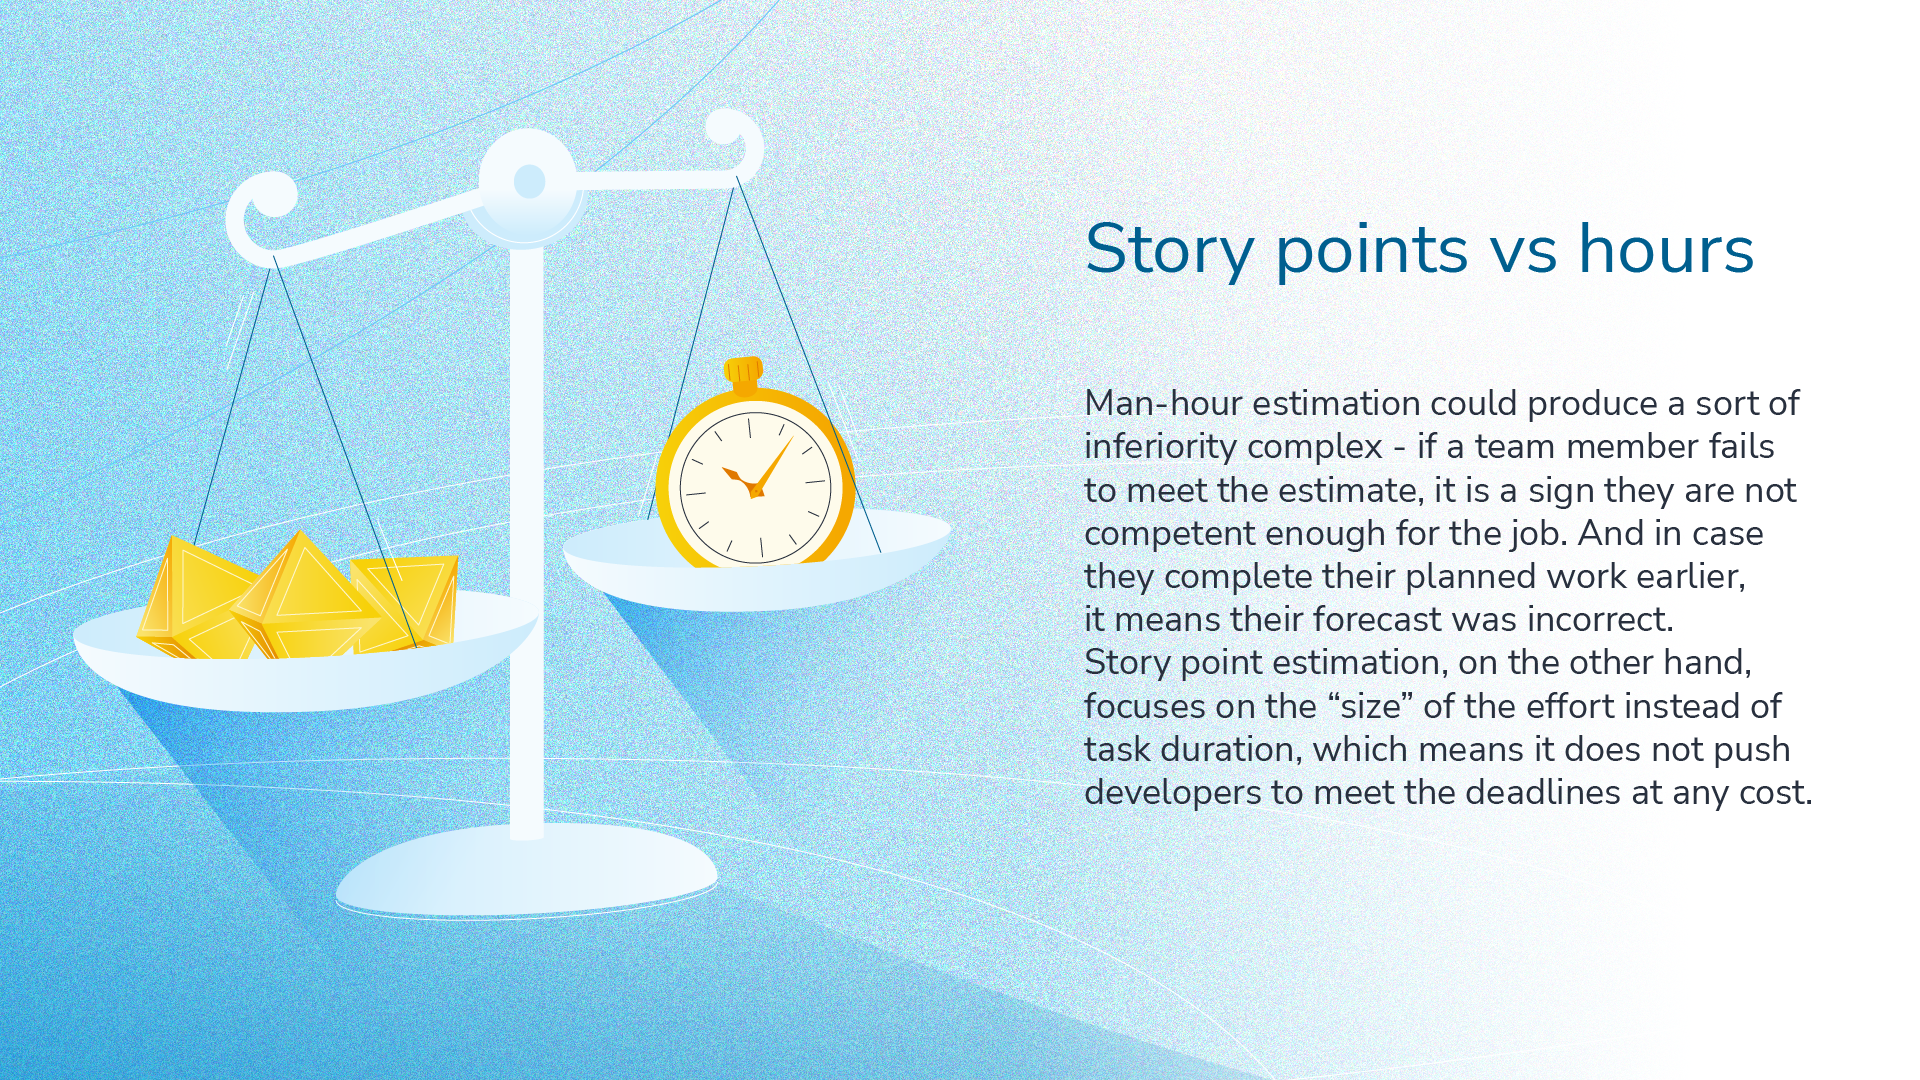 Story points vs hours. Man-hour estimation could produce a sort of inferiority complex - if a team member fails to met the estimate, it is the sign they are not competent enough for the job. And in case they complete their planned work earlier, it means their forecast was incorrect. Story point estimation, on the other hand, focuses on the "size" of the effort instead of the duration, which means it does not push developers to meet the deadline at any cost.